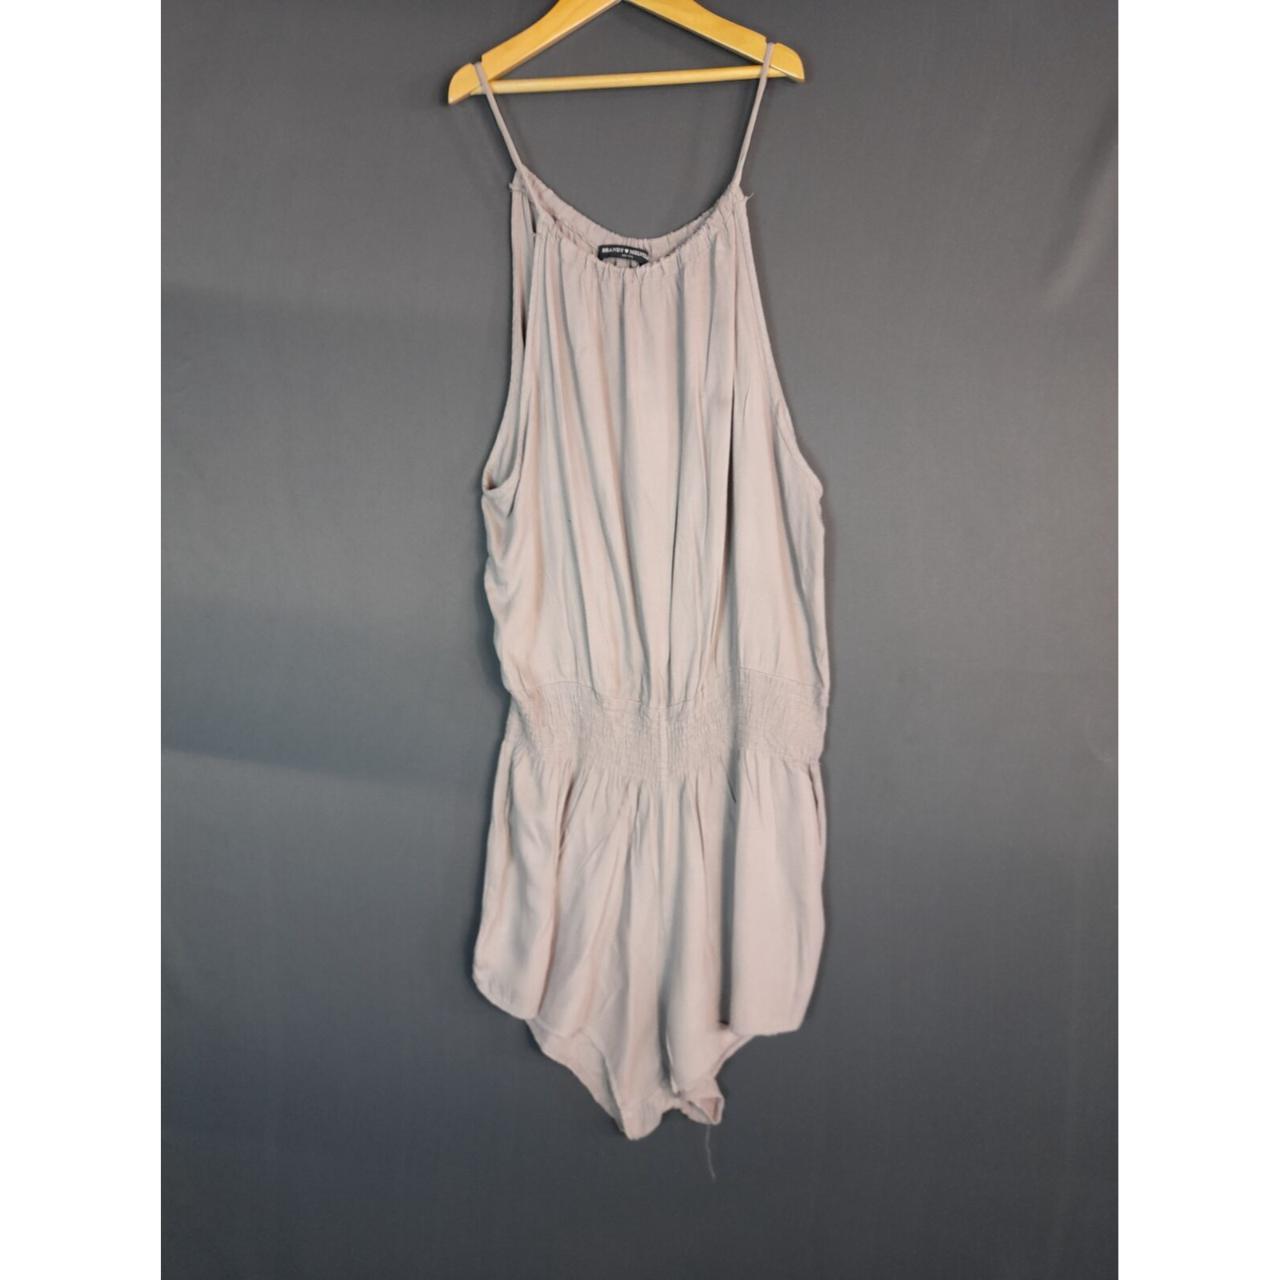 Product Image 2 - Brandy Melville Women’s Grey Strappy